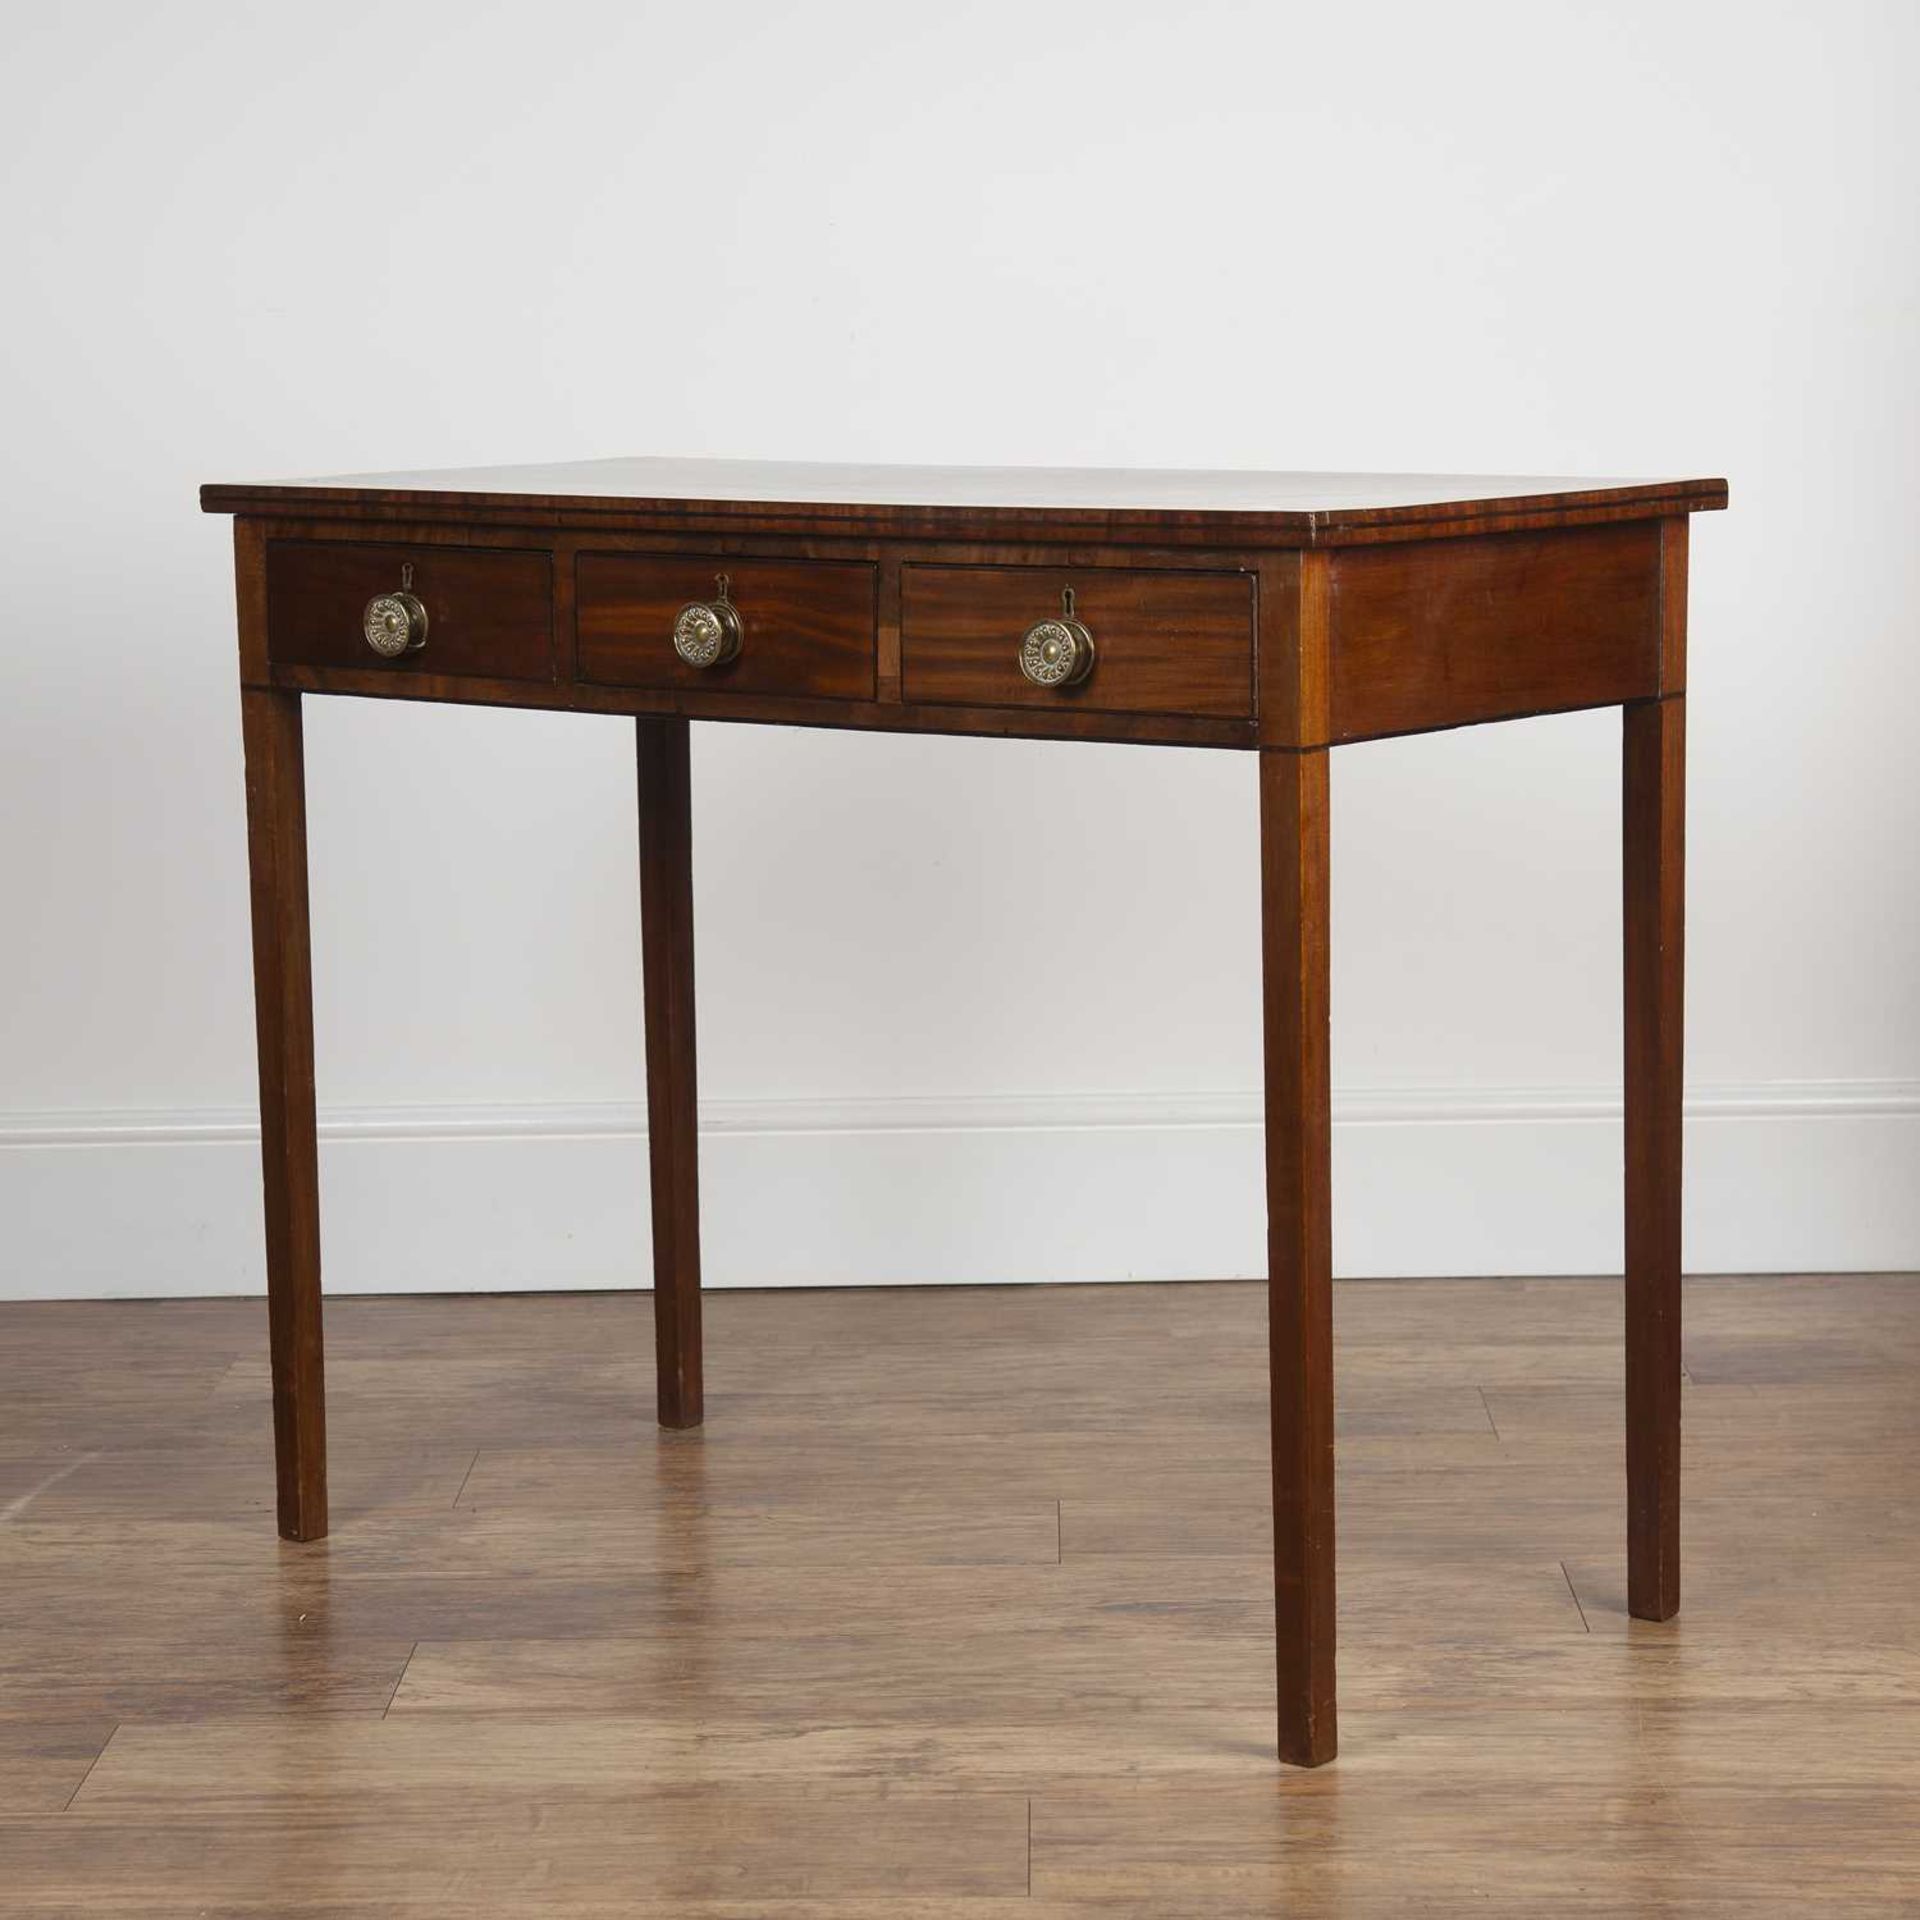 Mahogany side table 19th Century, fitted with three frieze drawers and round brass handles, standing - Bild 3 aus 6